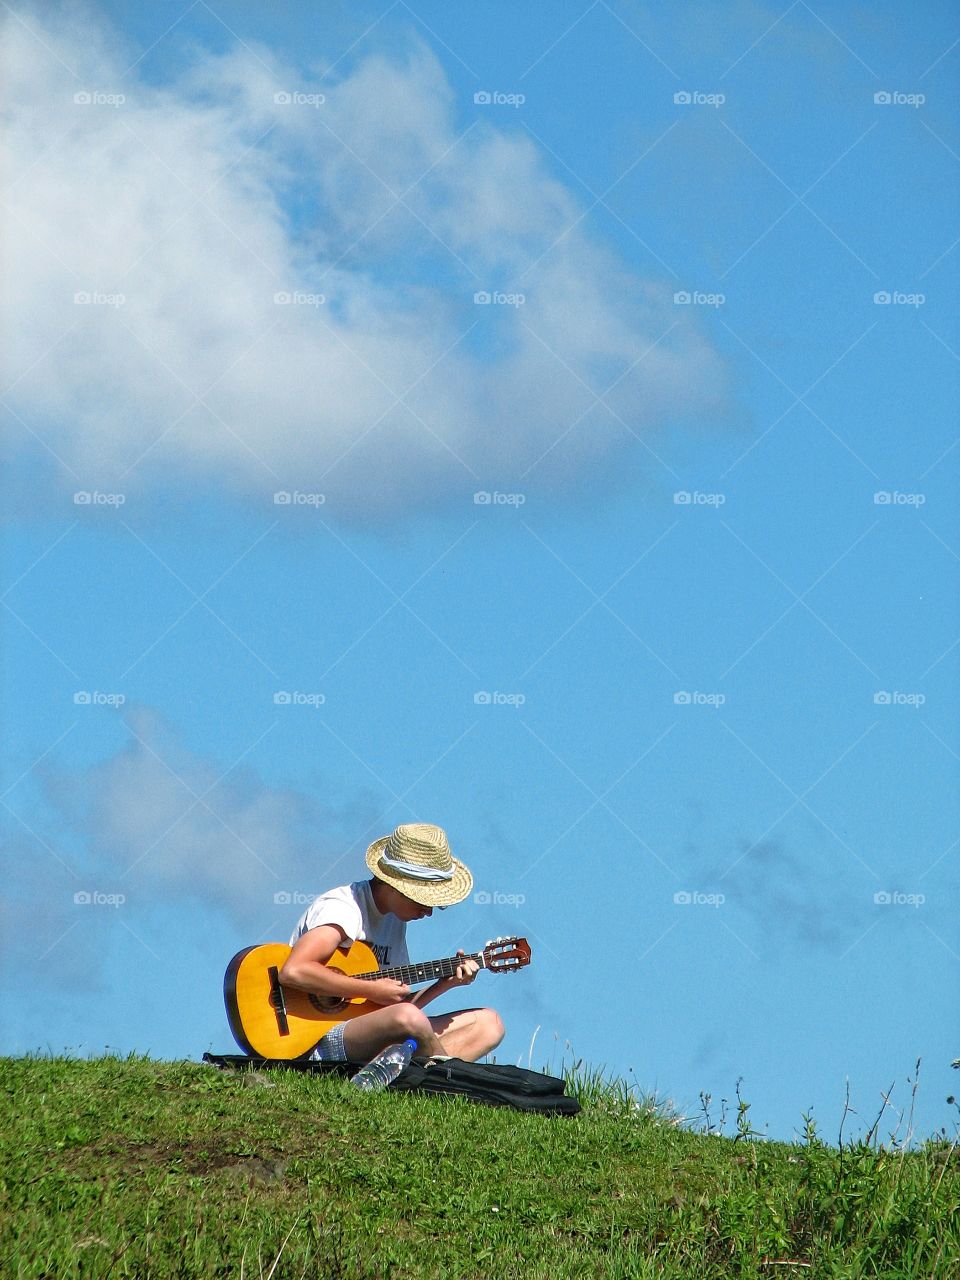 A young boy plays his guitar on a hillside with a beautiful blue sky overhead.